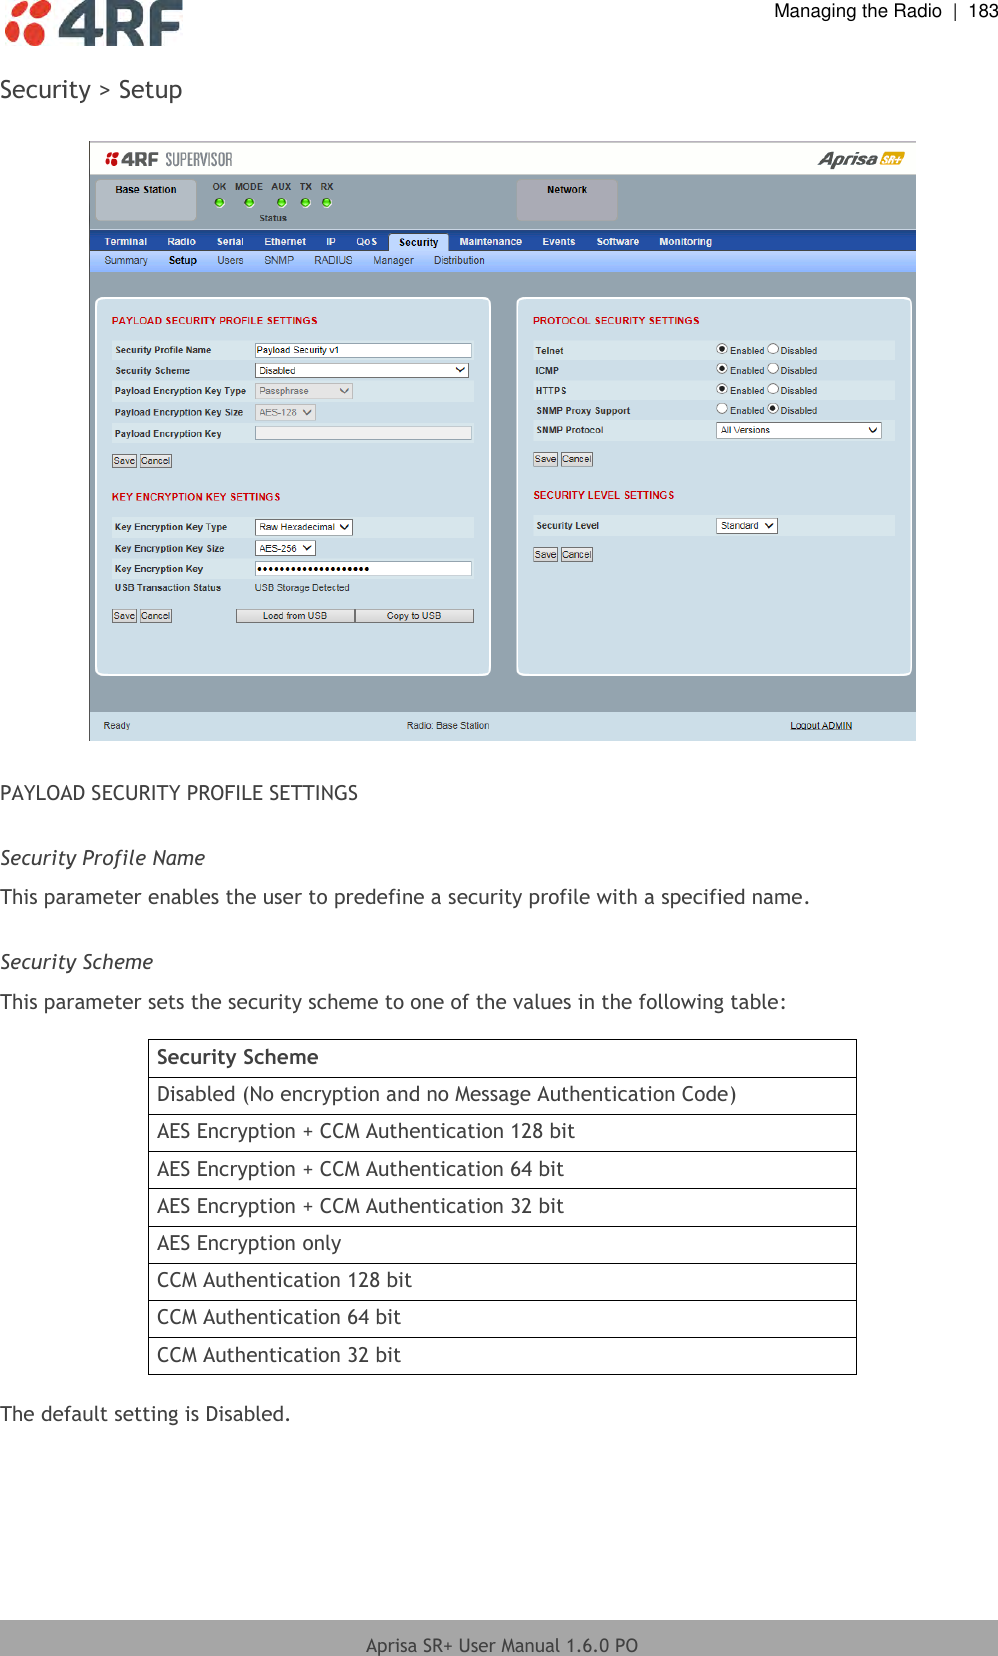  Managing the Radio  |  183  Aprisa SR+ User Manual 1.6.0 PO  Security &gt; Setup    PAYLOAD SECURITY PROFILE SETTINGS  Security Profile Name This parameter enables the user to predefine a security profile with a specified name.  Security Scheme This parameter sets the security scheme to one of the values in the following table:  Security Scheme Disabled (No encryption and no Message Authentication Code) AES Encryption + CCM Authentication 128 bit AES Encryption + CCM Authentication 64 bit AES Encryption + CCM Authentication 32 bit AES Encryption only CCM Authentication 128 bit CCM Authentication 64 bit CCM Authentication 32 bit  The default setting is Disabled.  